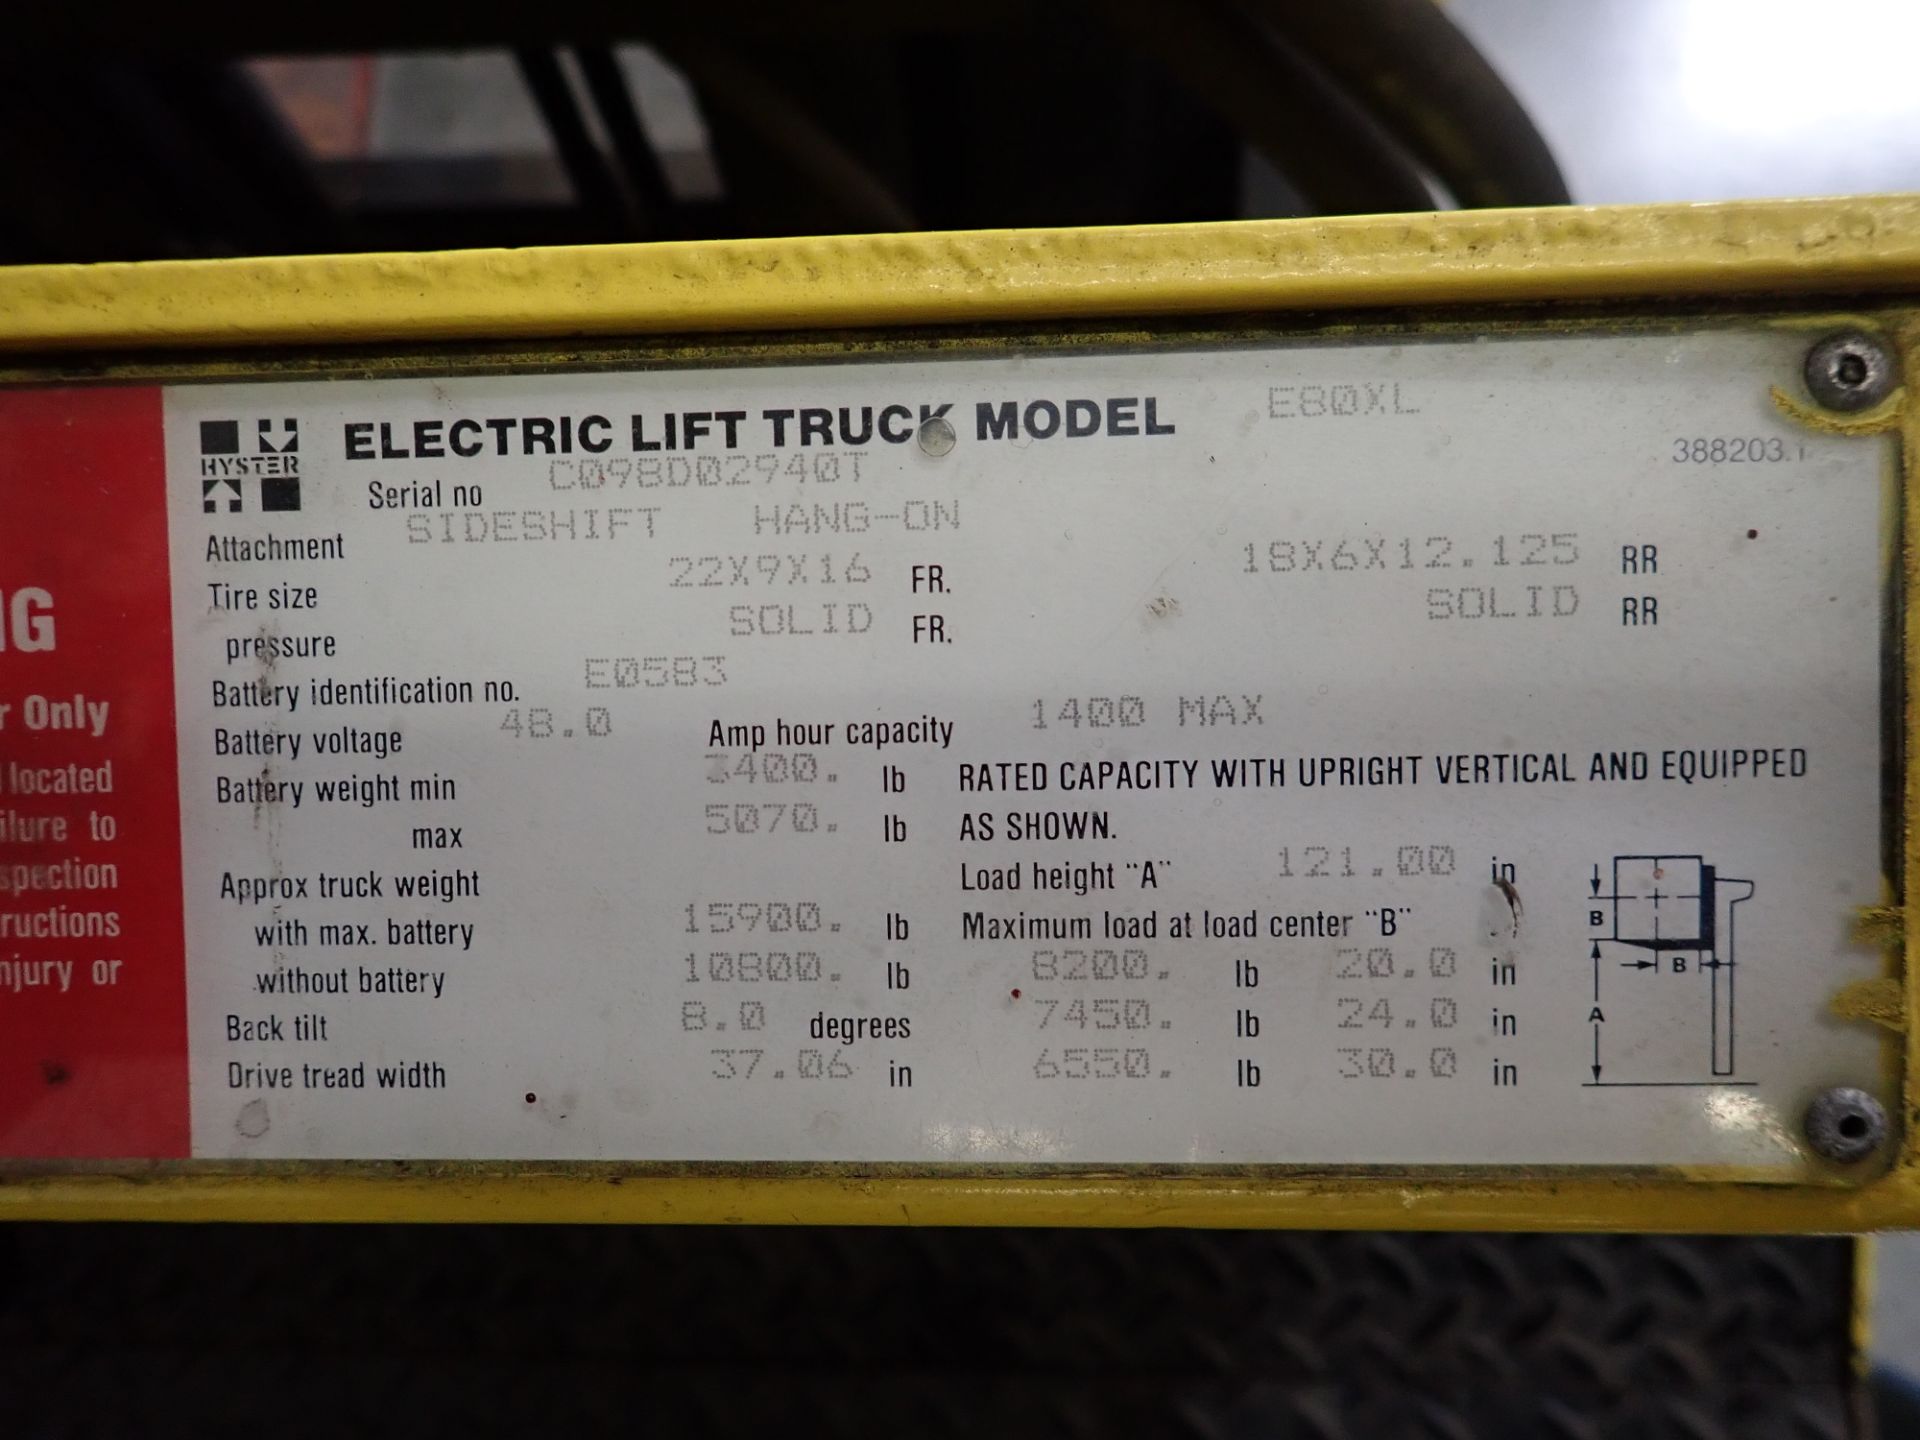 Hyster E80XL Electric Lift Truck with Trojan Odyssey Charger and Extensions - Image 3 of 3